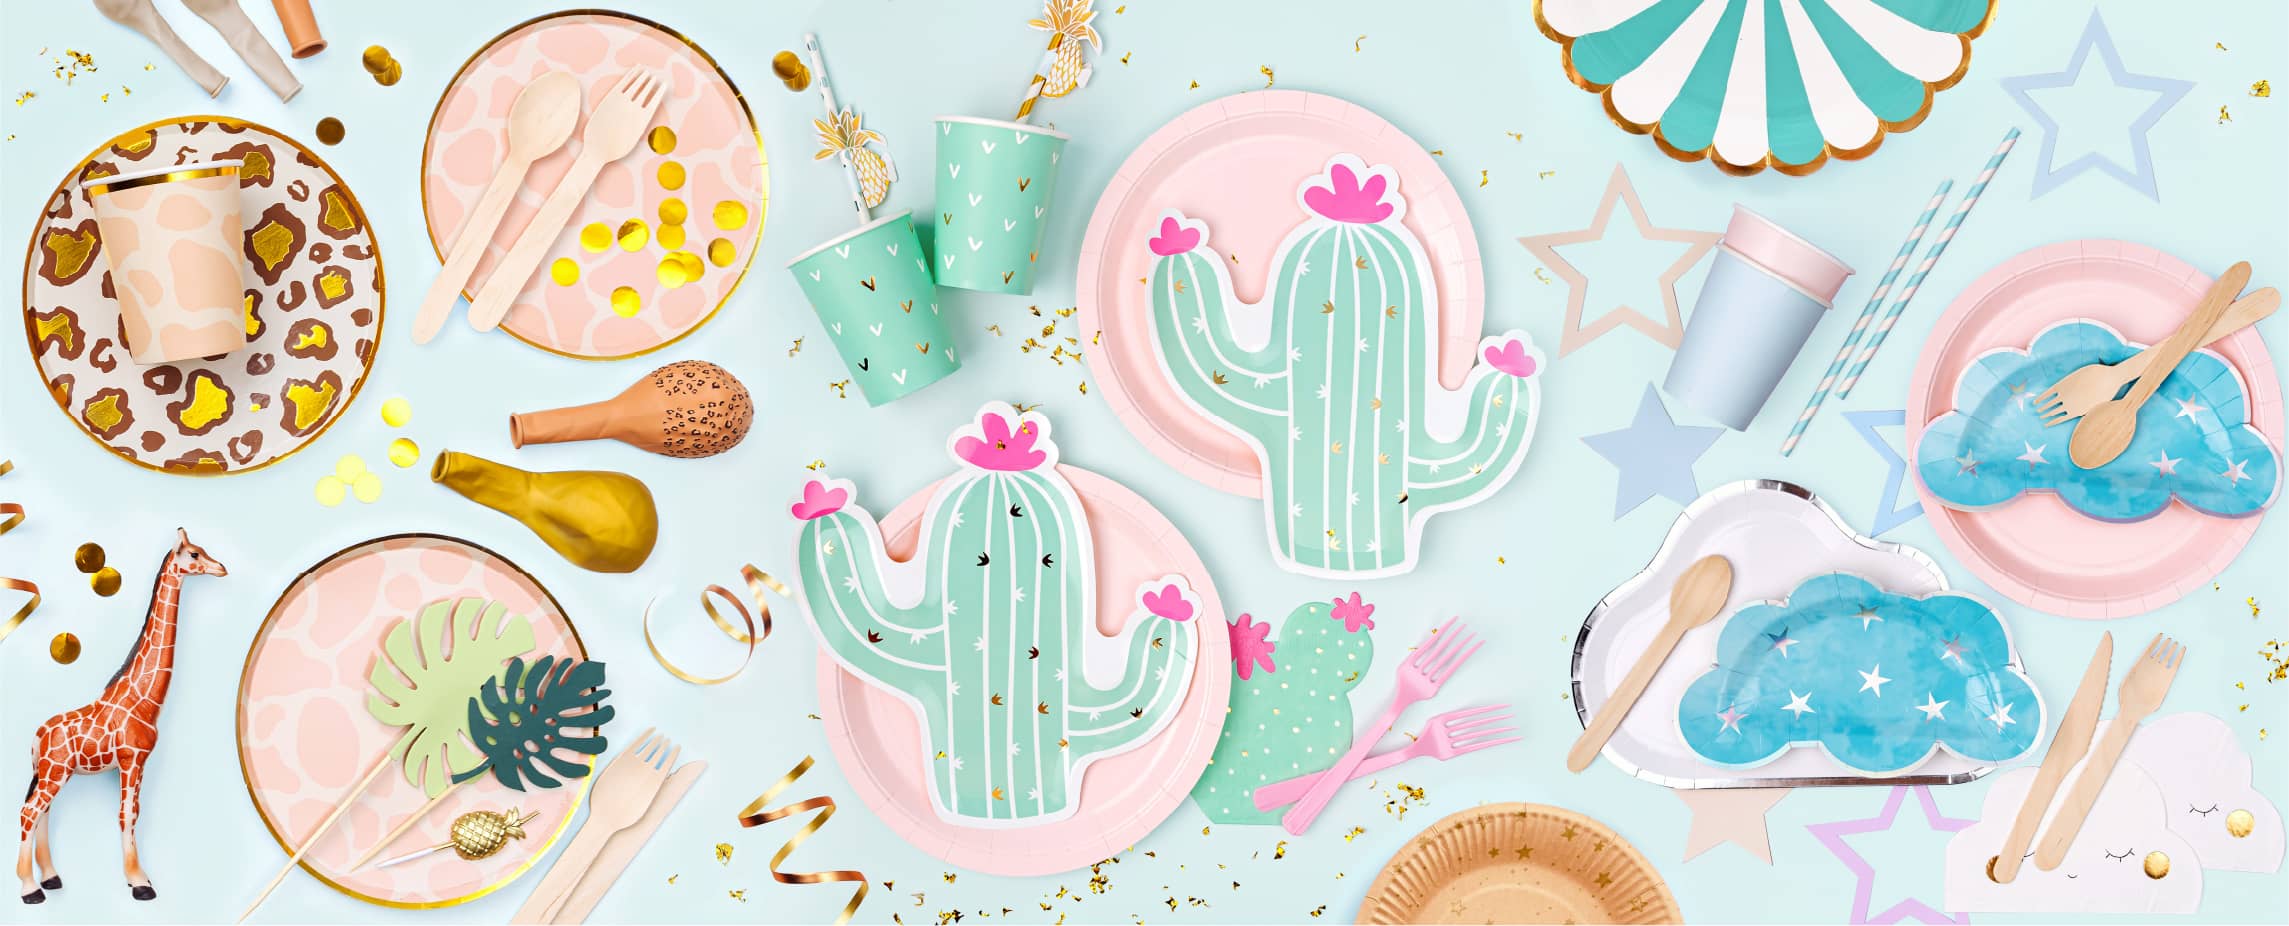 Paper party supplies featuring cactus- and cloud-shaped plates, animal print plates, silverware, balloons and more!